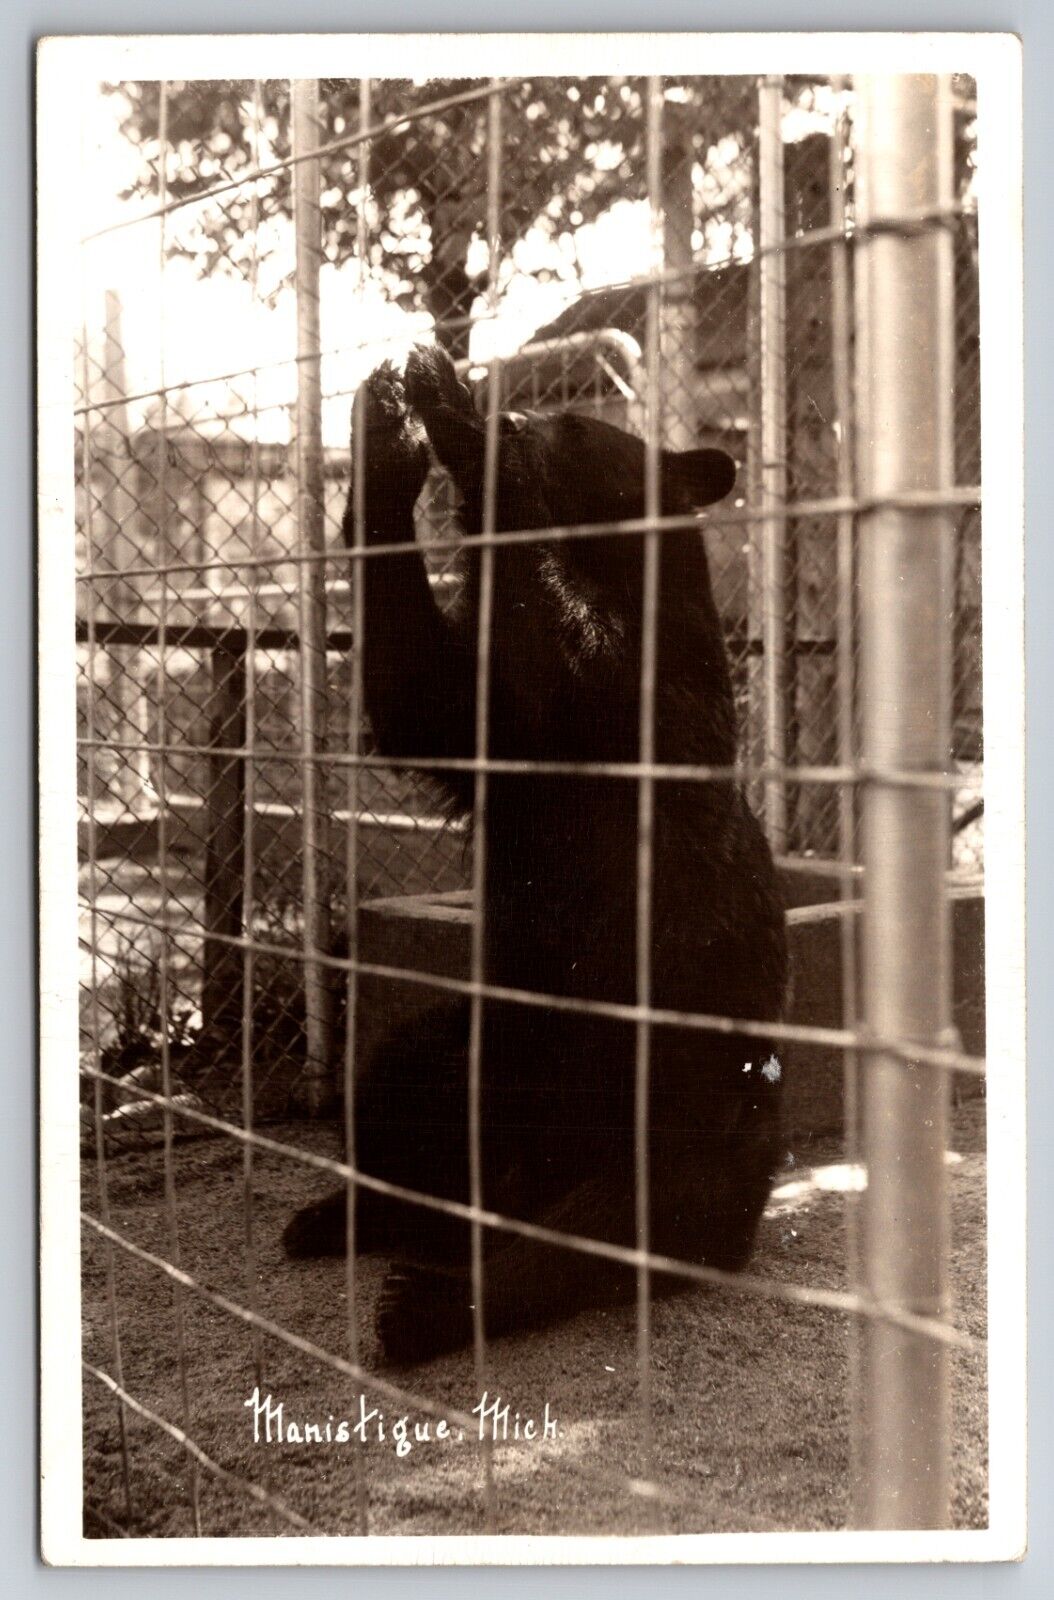 Bear in the Zoo at Manistique Michigan MI c1950 Real Photo RPPC